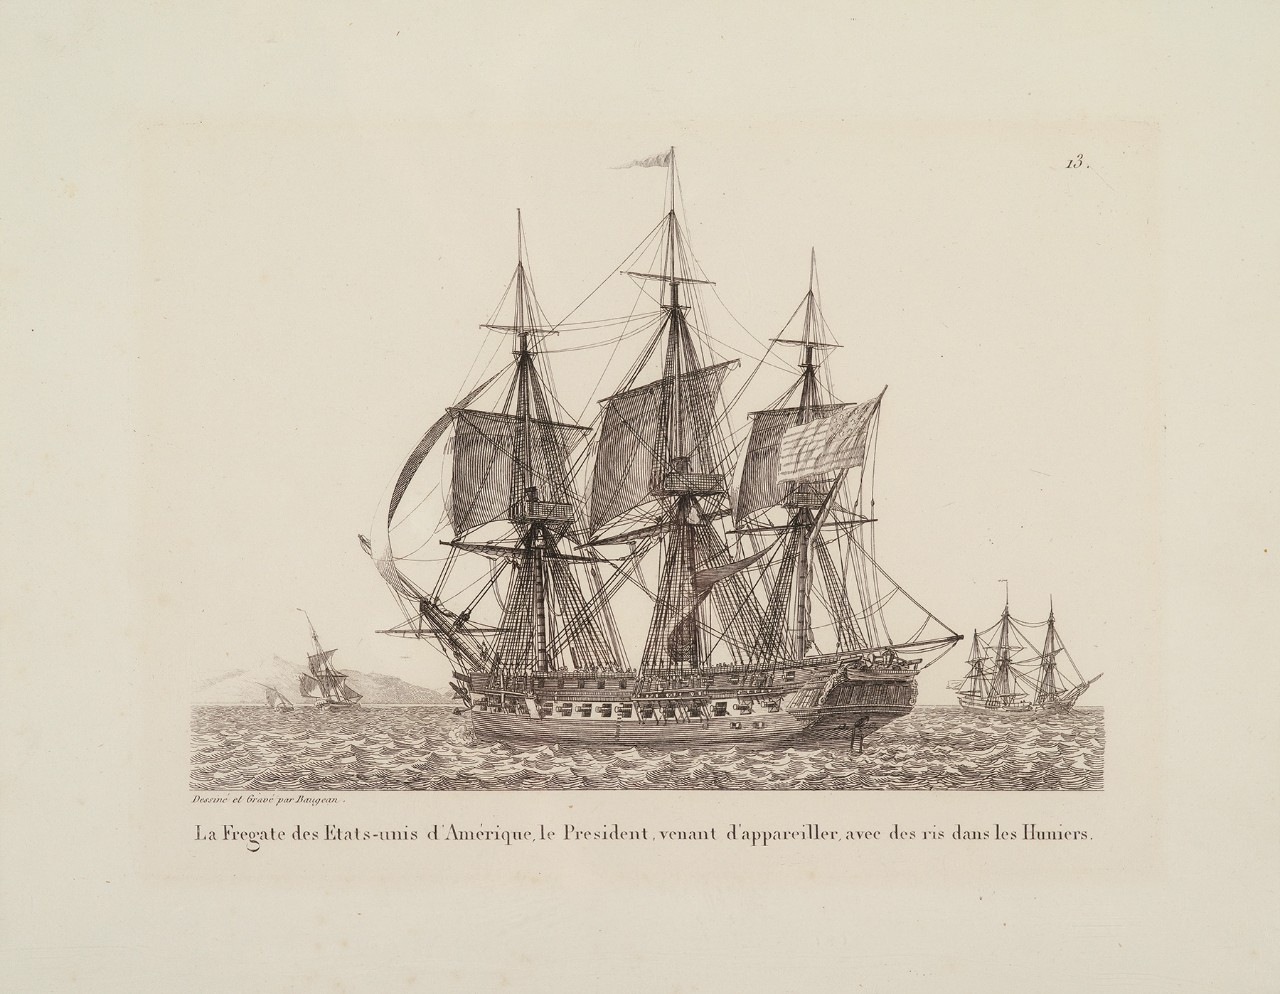 A port side view of a sailing ship, three other ships in the background